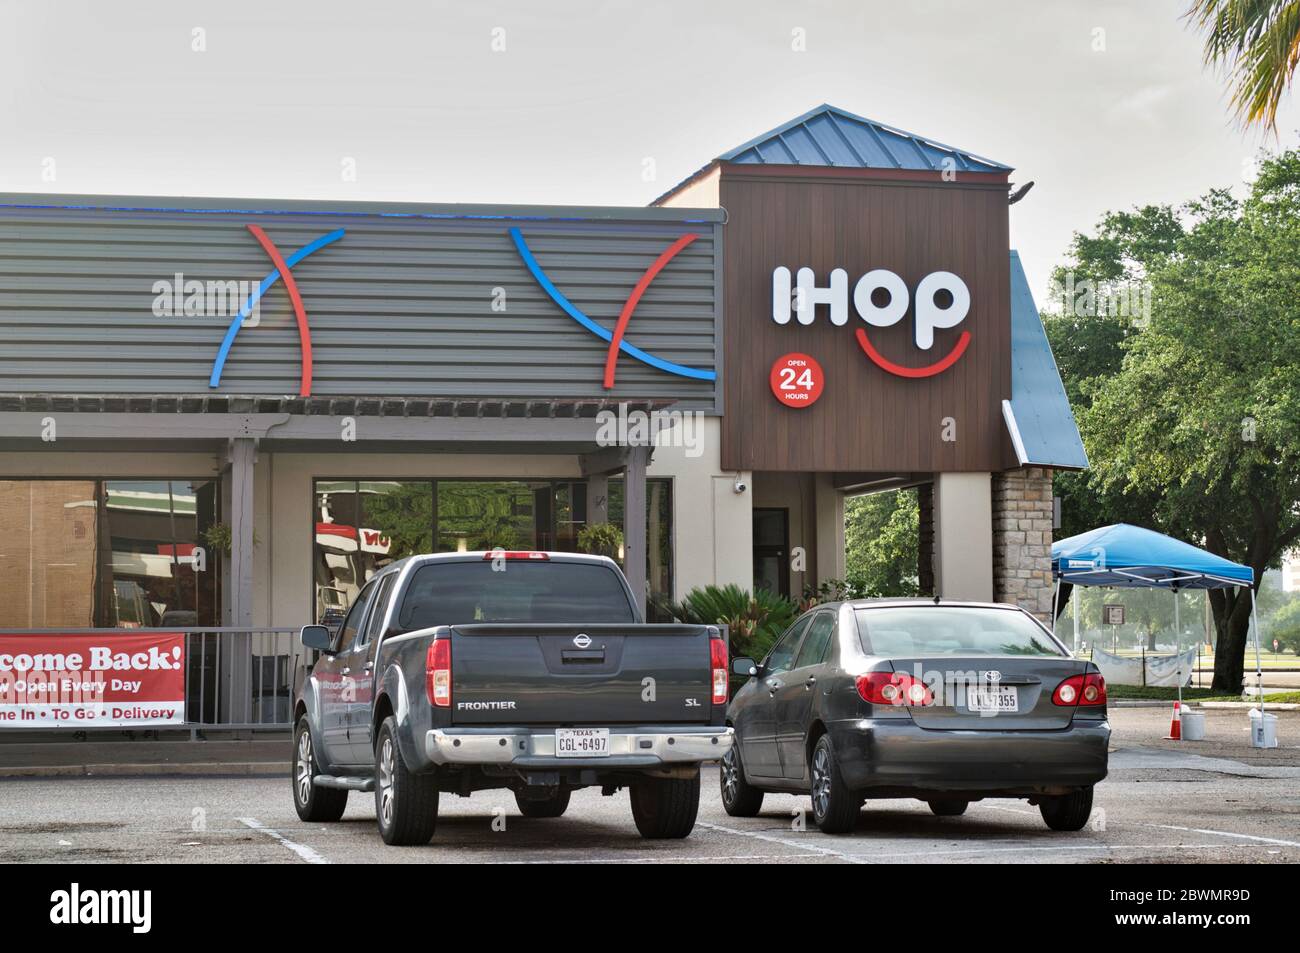 Houston, Texas/USA 05/21/2020: iHOP International House of Pancakes restaurant exterior in Houston, TX. One of many locations across the USA. Stock Photo